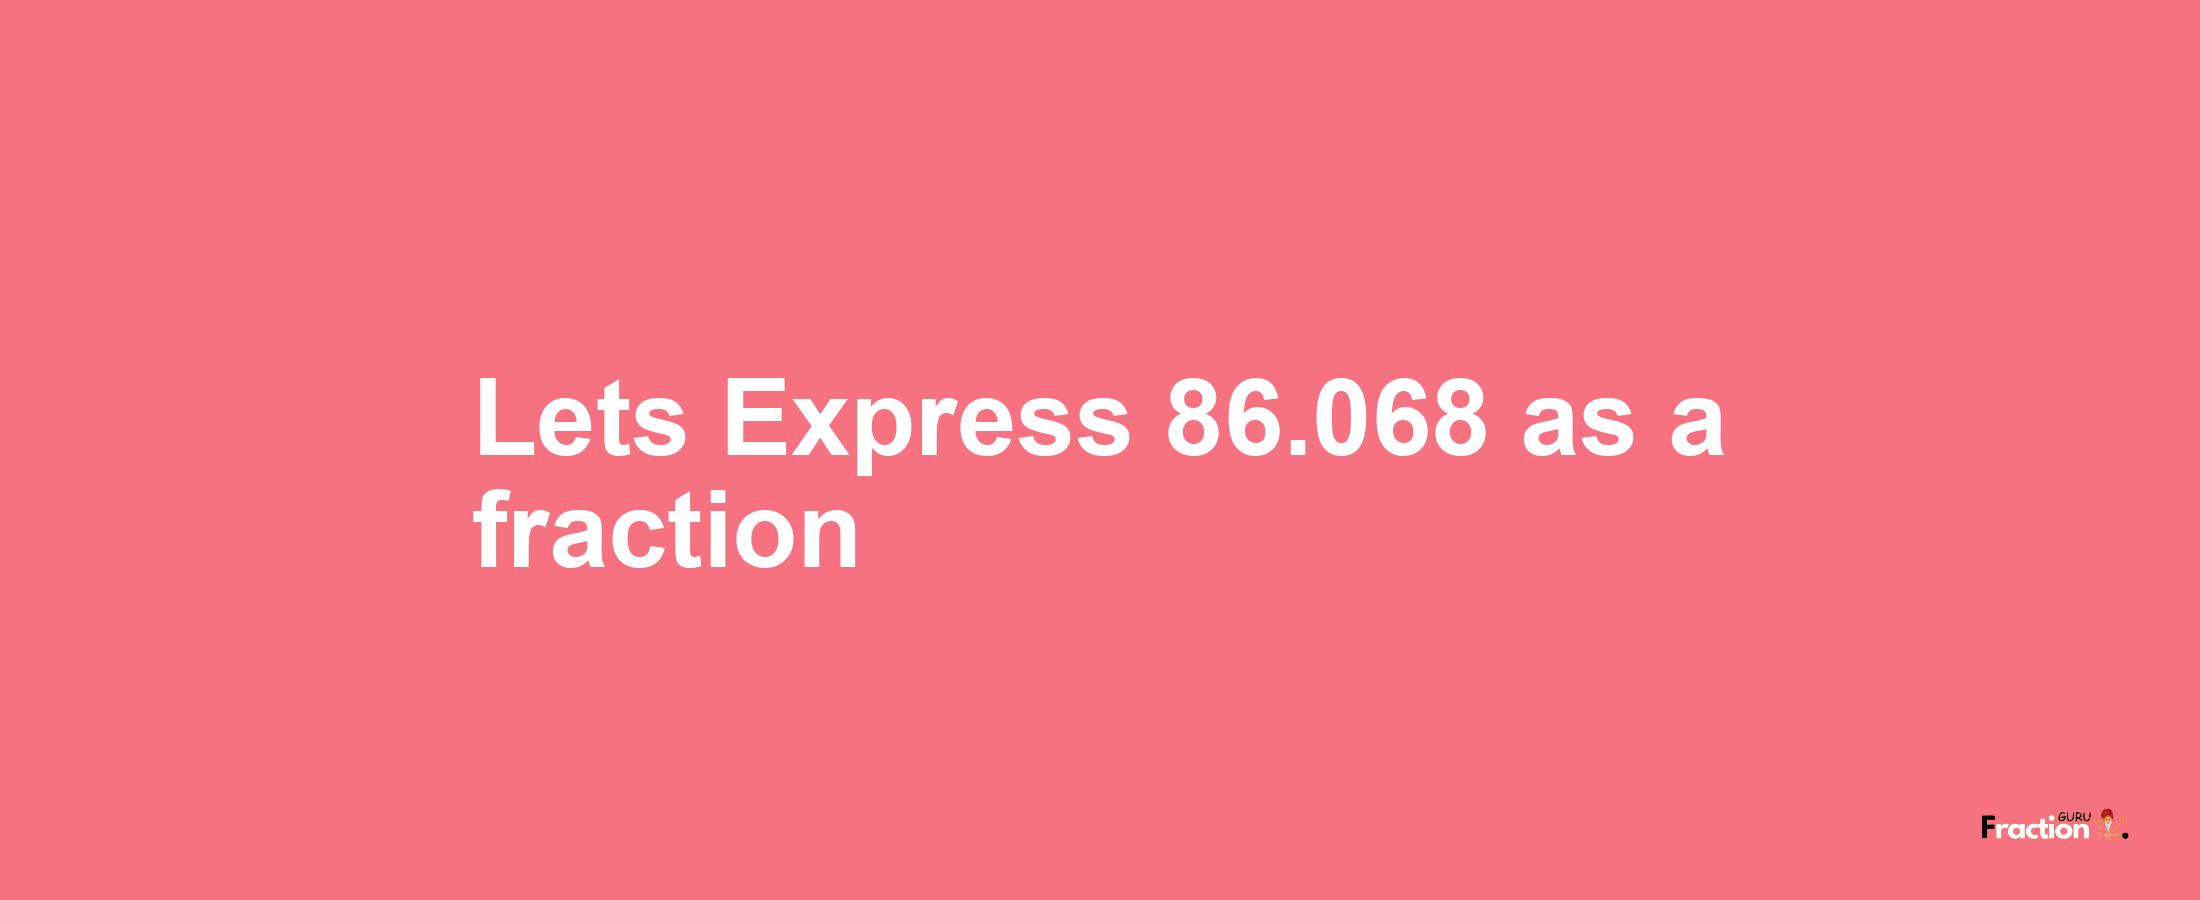 Lets Express 86.068 as afraction